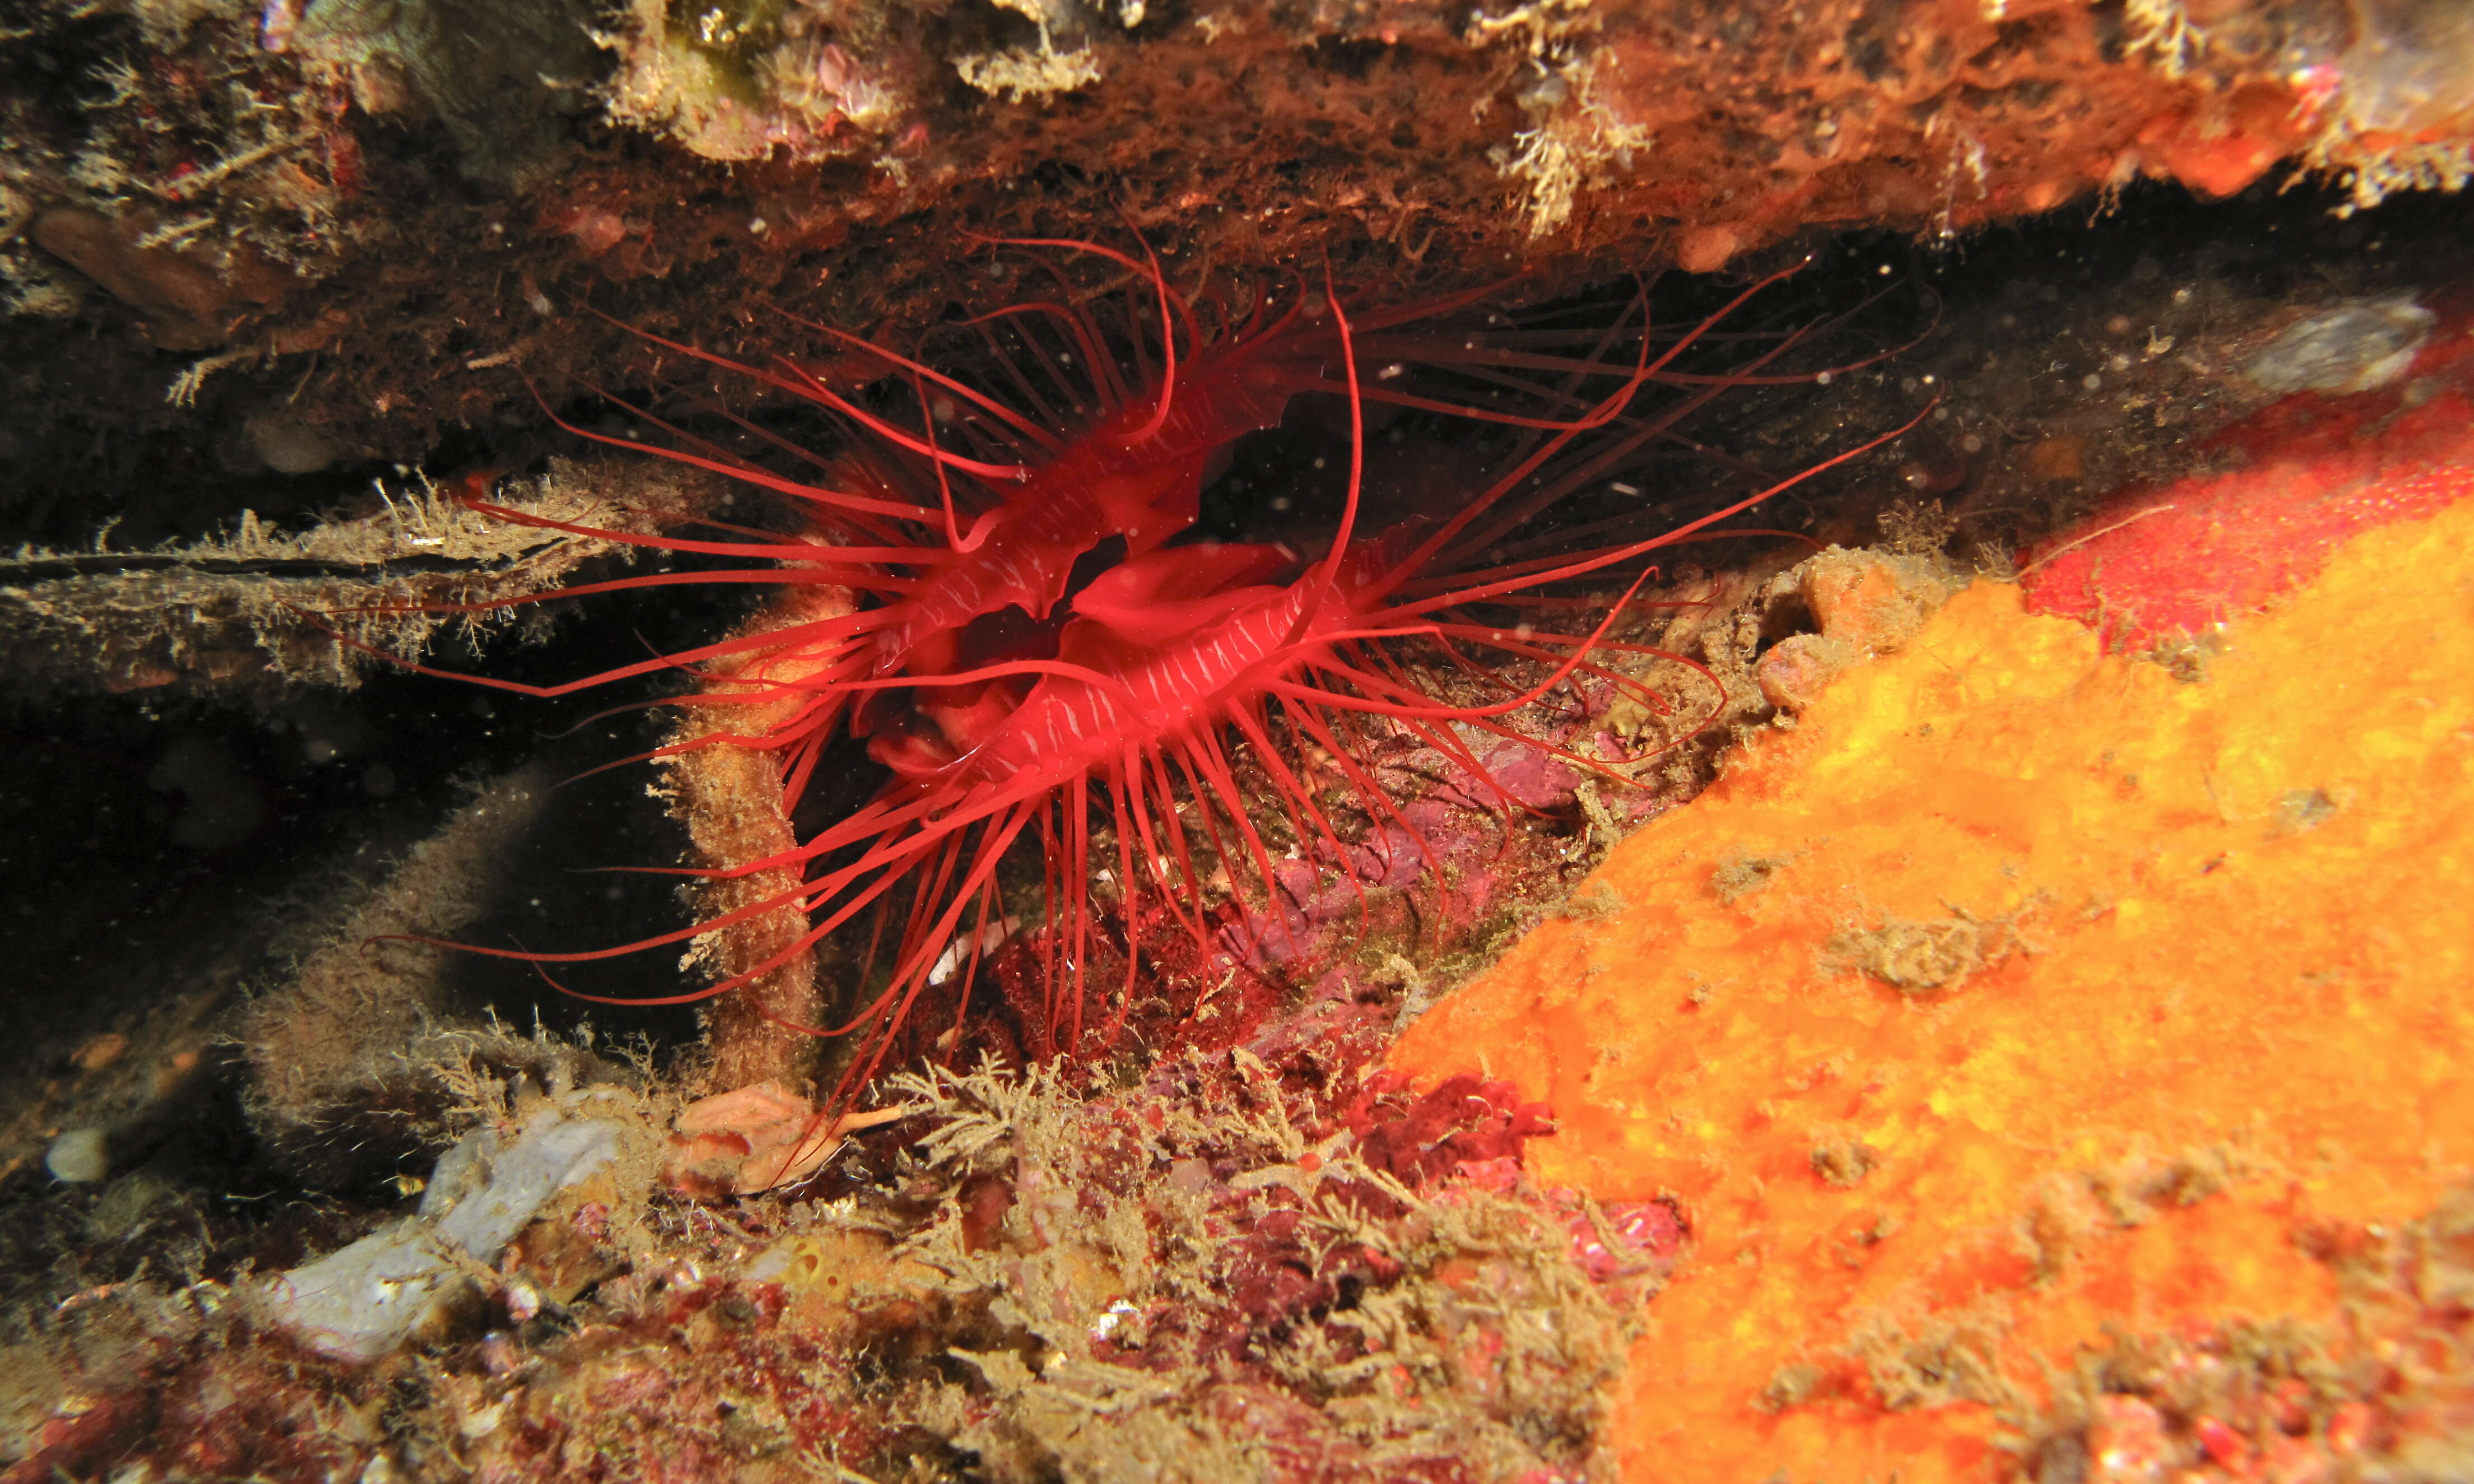 Image of Electric Flame Scallop